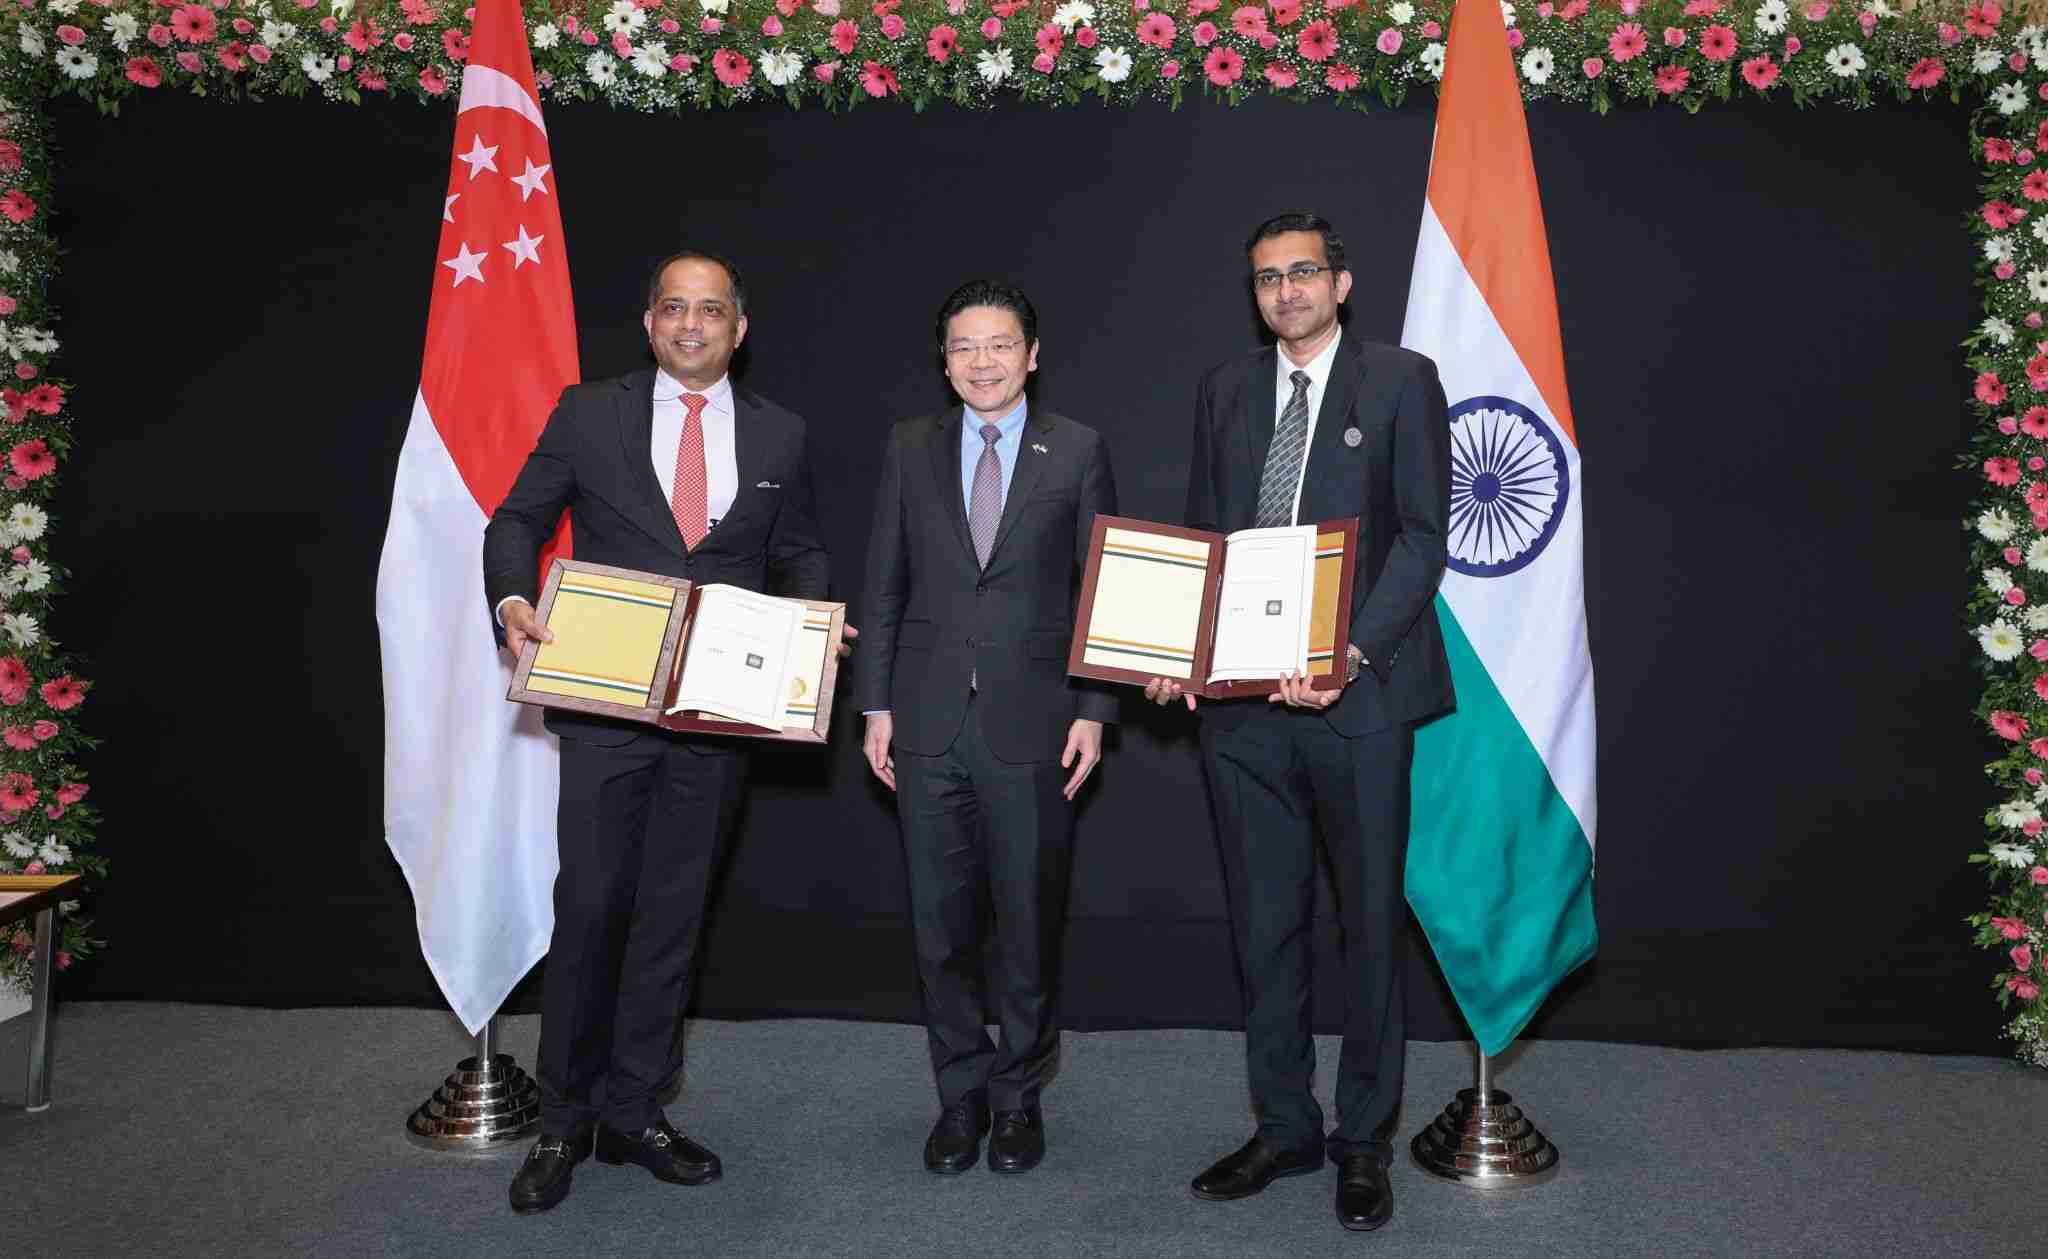 Singapore and India to partner on fintech regulation